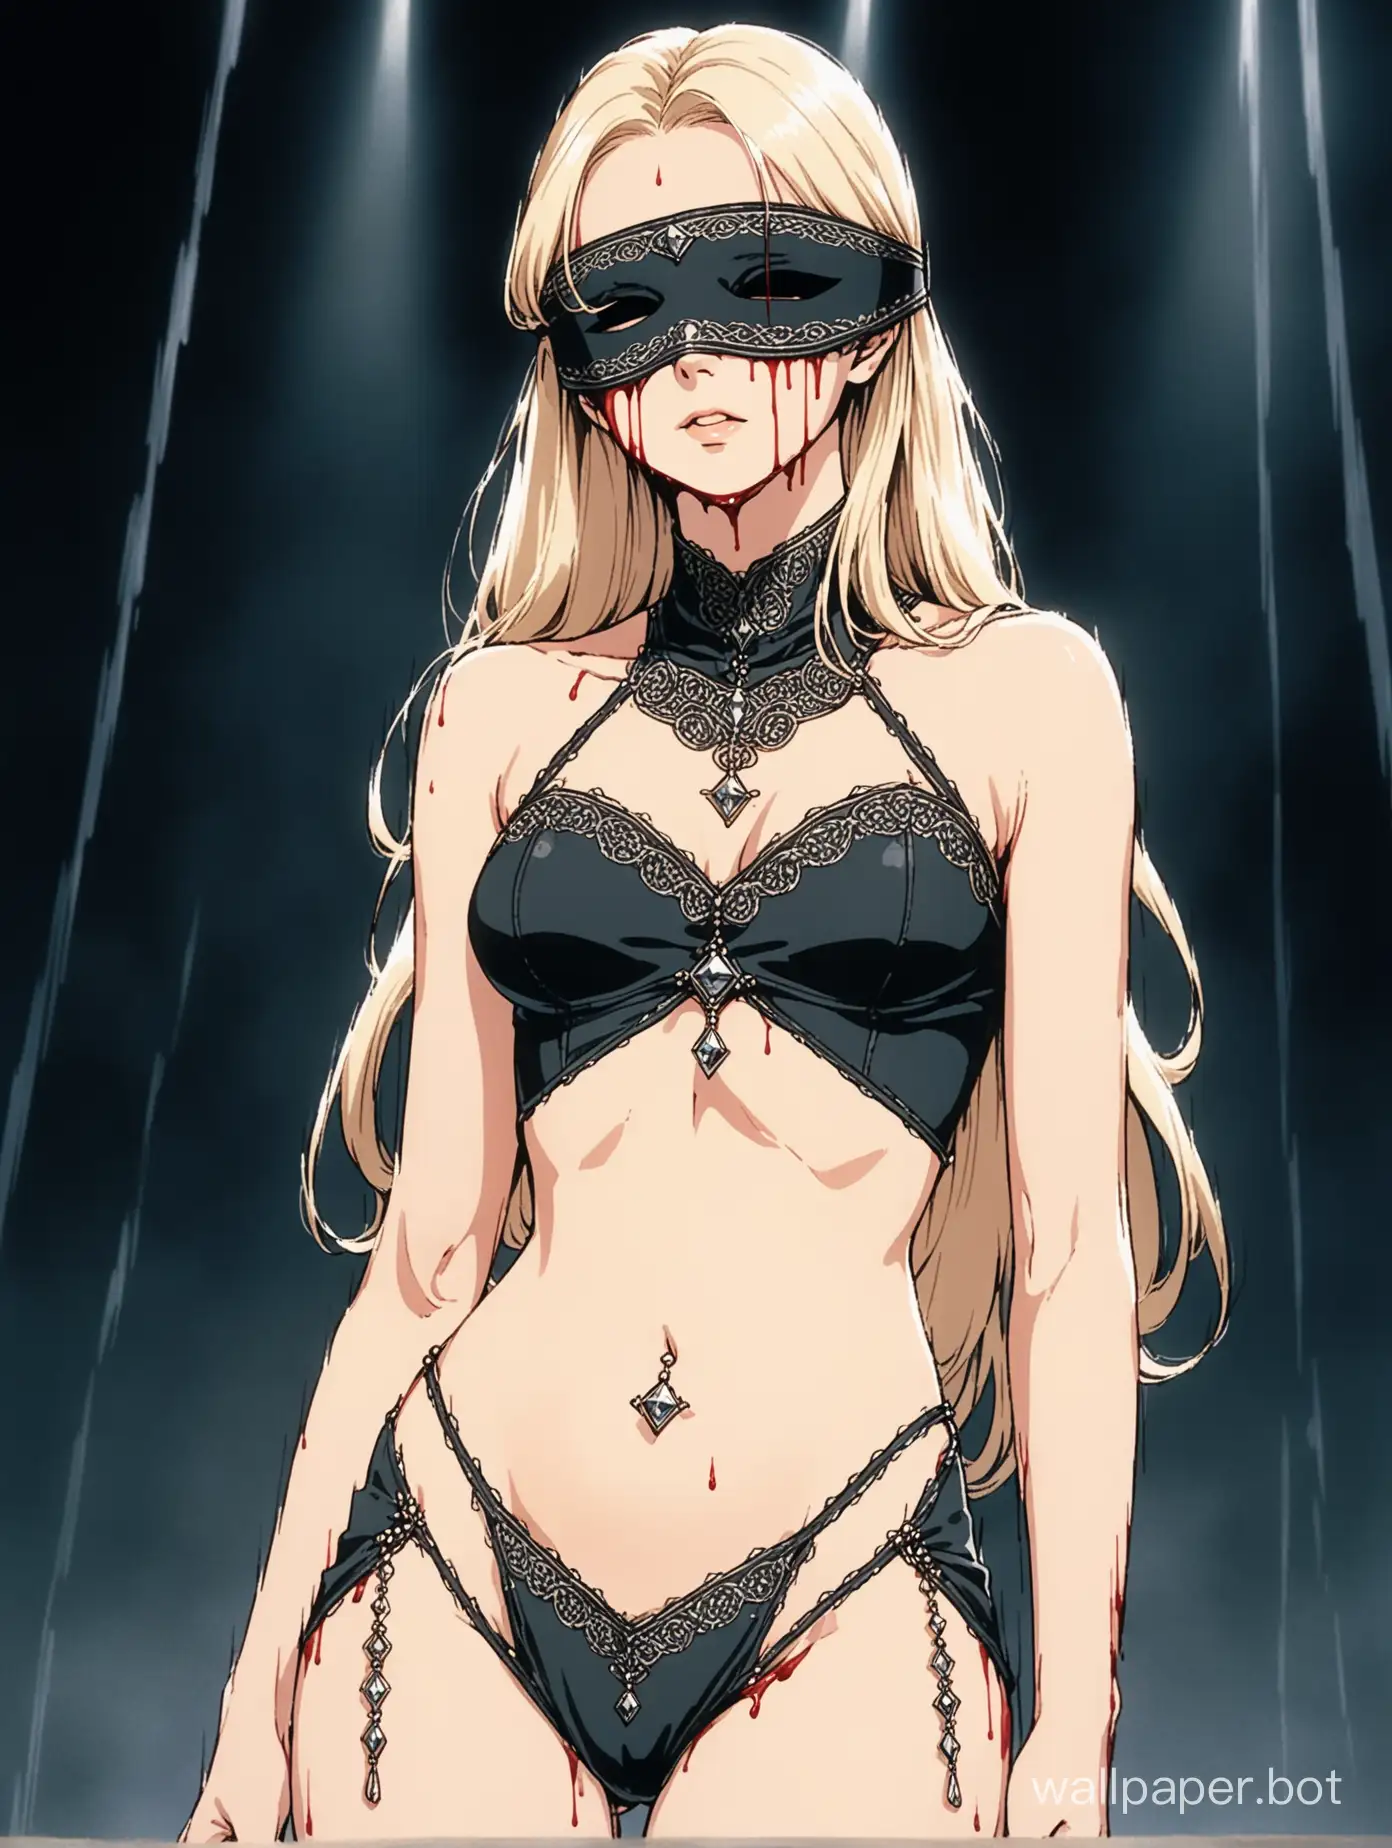 a young and attractive white woman, she has long wavy white-blonde hair, standing regally, elegant and slender, thin sharp face, wearing an ornate metal blindfold, bleeding from underneath her blindfold, blood drippoing down her cheeks, wearing a sheer thin dark grey skintight dress, small diamond-shaped navel cutout, her stomach is exposed, wearing a navel piercing, decorative stitching, medieval elegance, 1980s retro anime